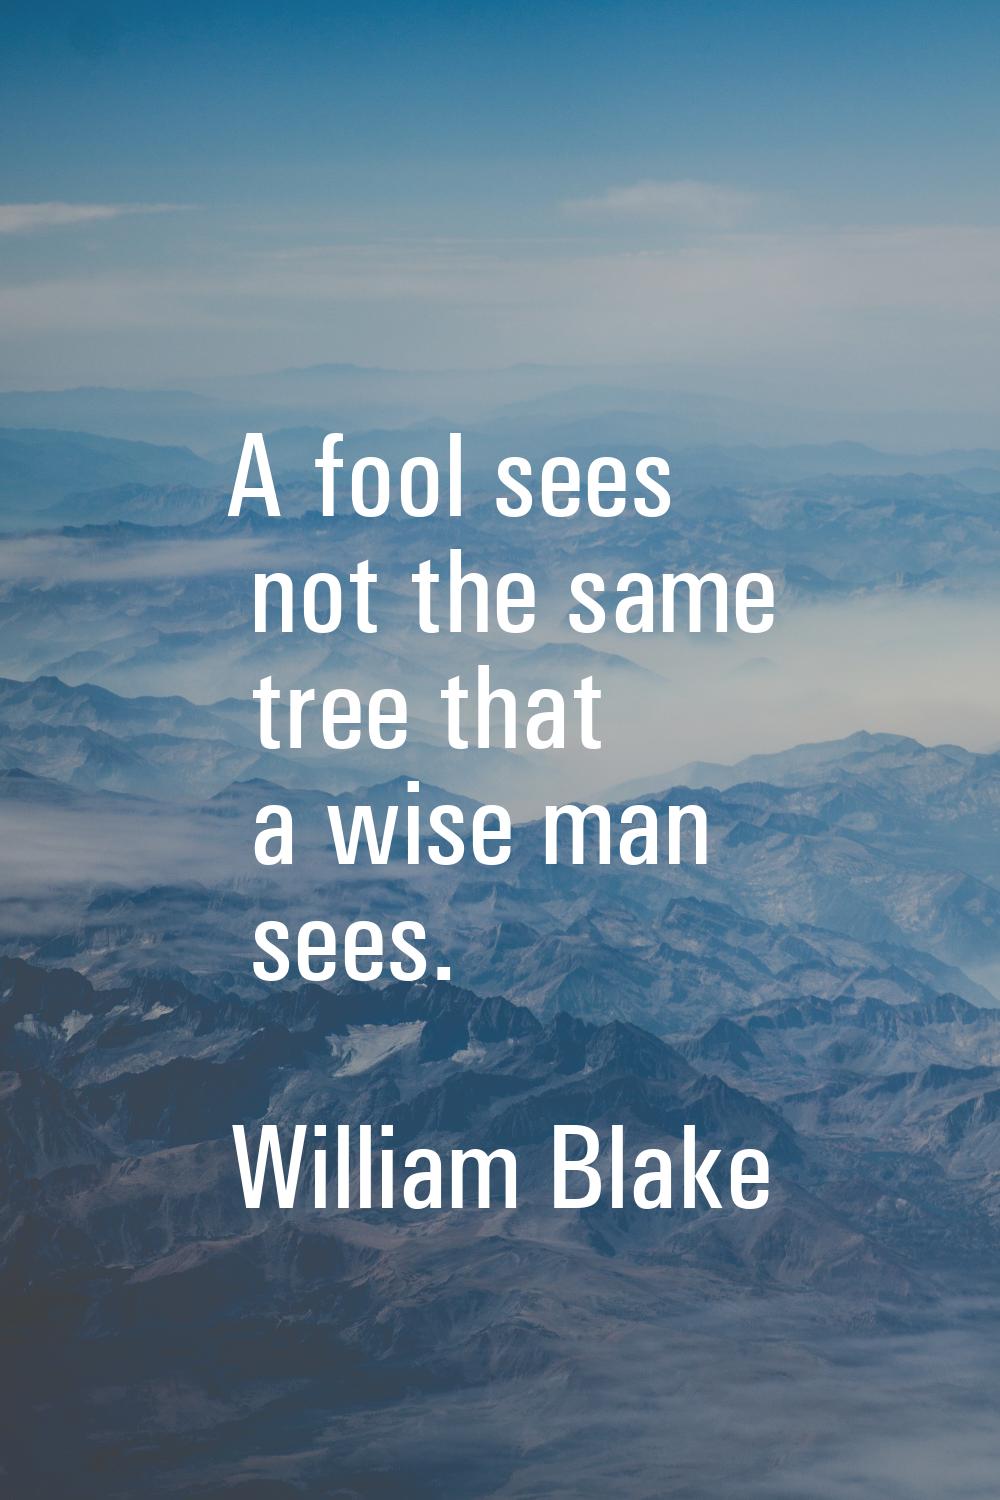 A fool sees not the same tree that a wise man sees.